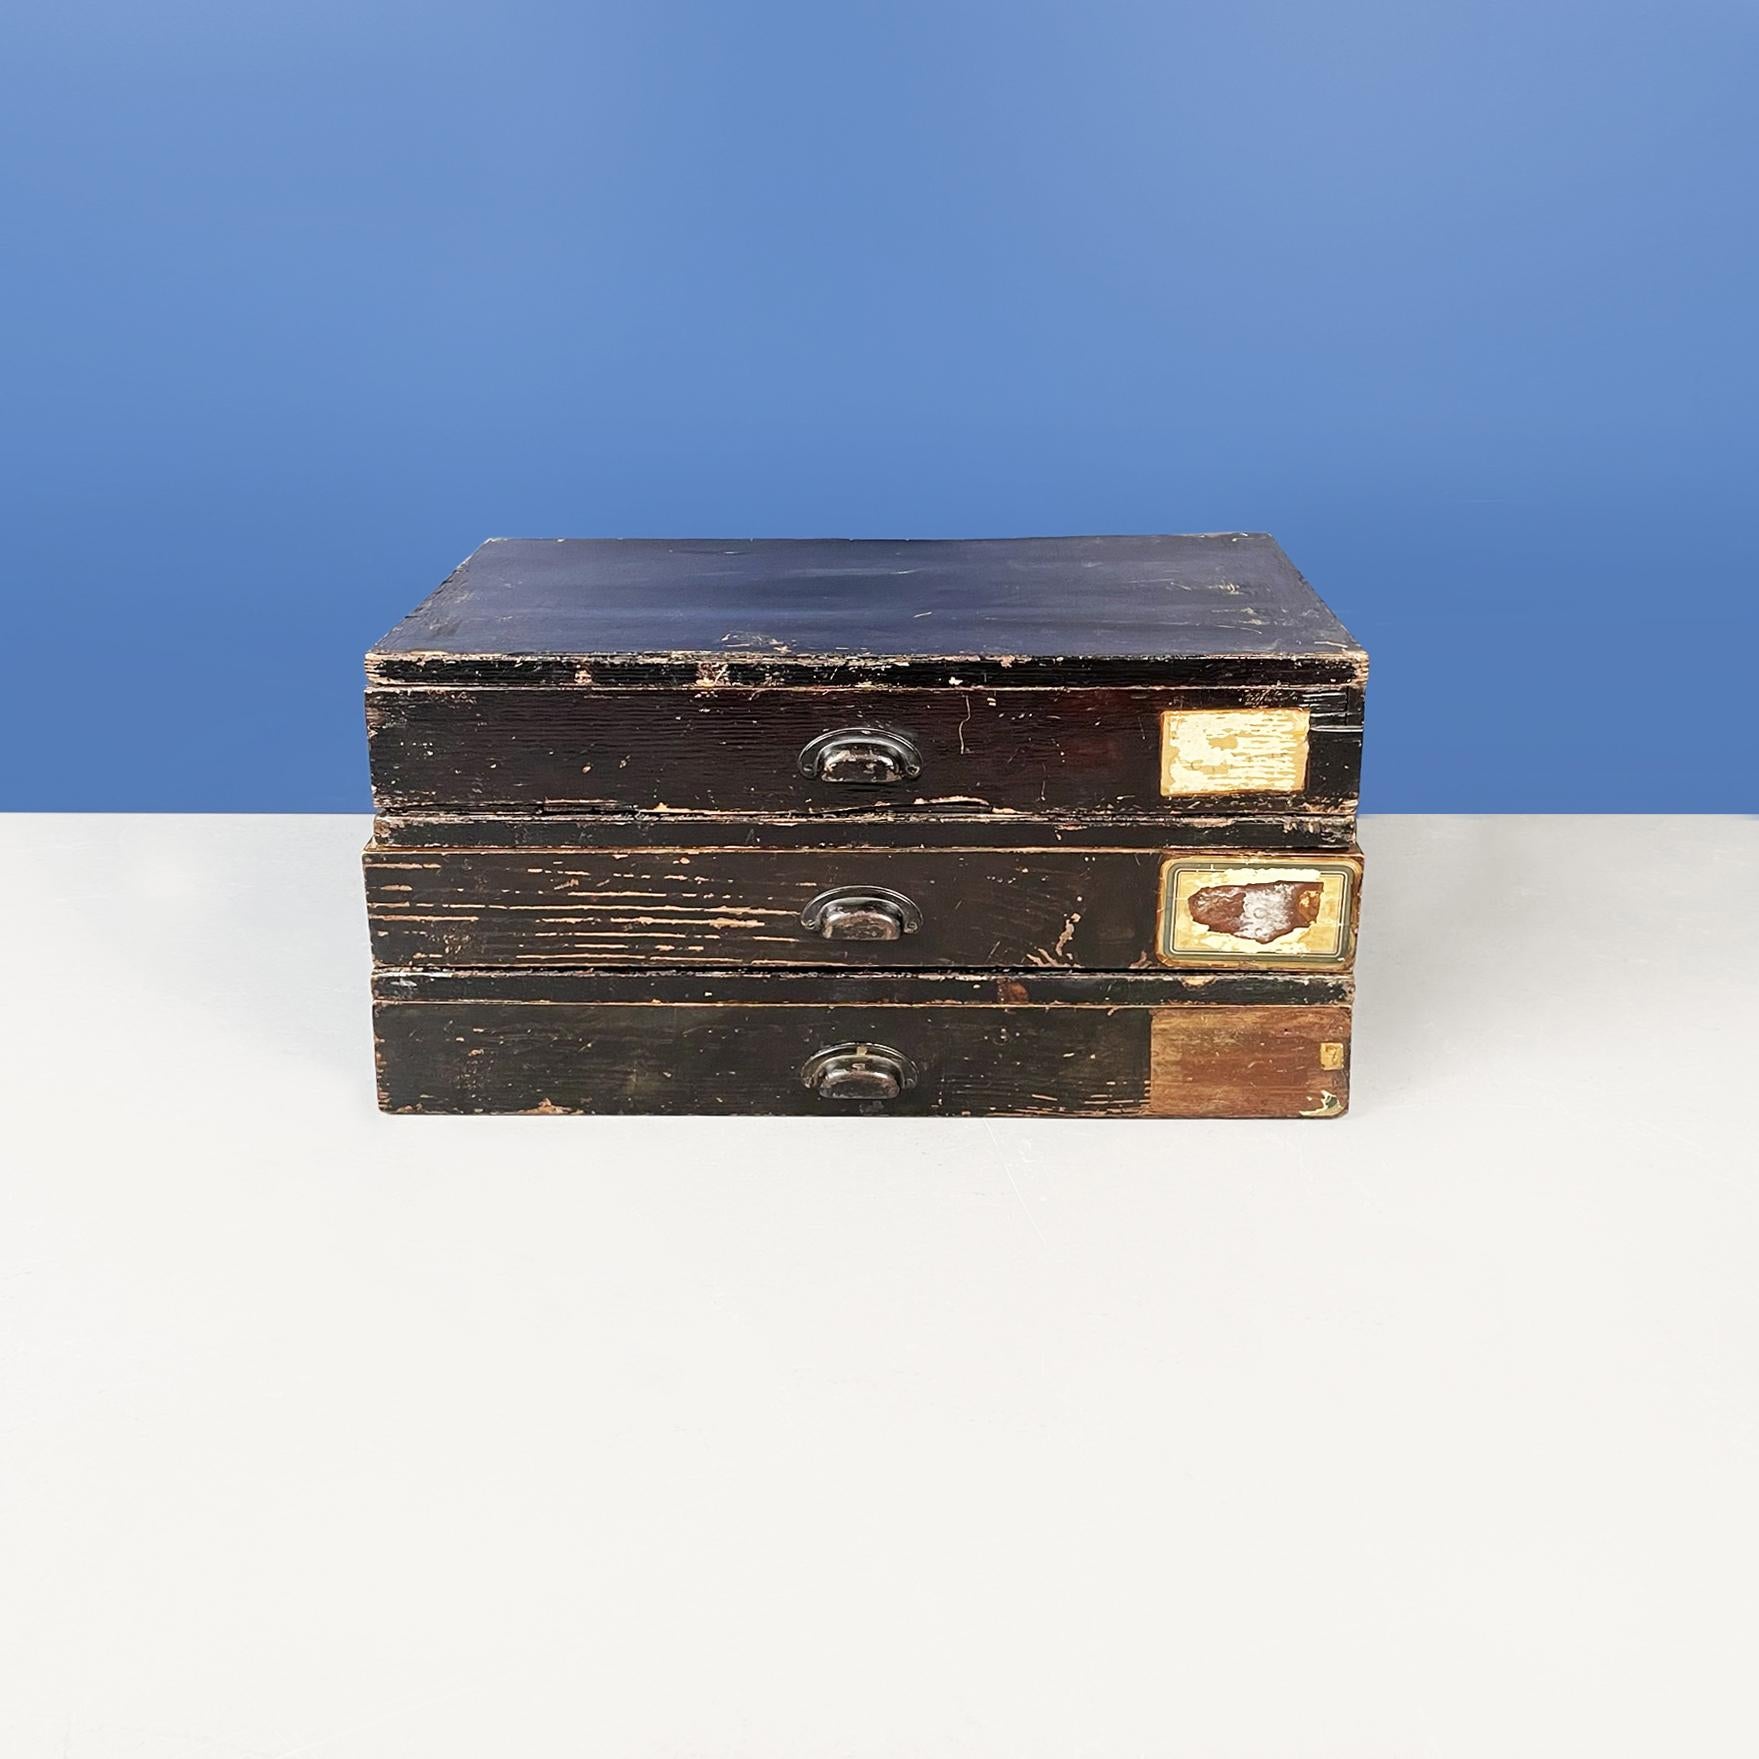 Italian antique Rectangular container boxes in dark wood, 1900s
Set of 3 rectangular container boxes in dark wood. Lids present. On the front they have a metal handle, to make it easier to get out of the box.
1900s.
Good conditions, it has various